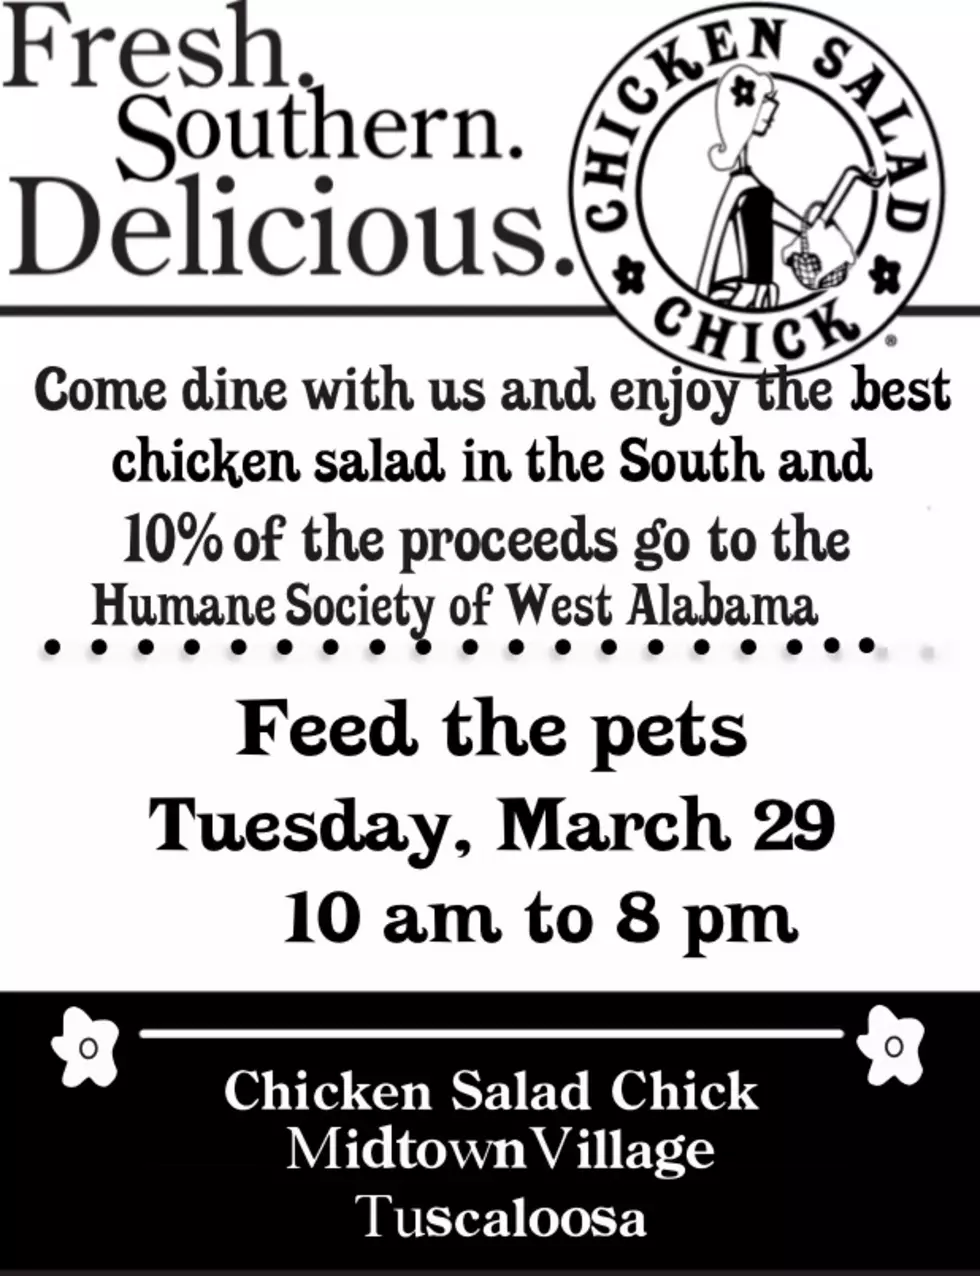 Local Restaurant to Donate Proceeds to Humane Society of West Alabama